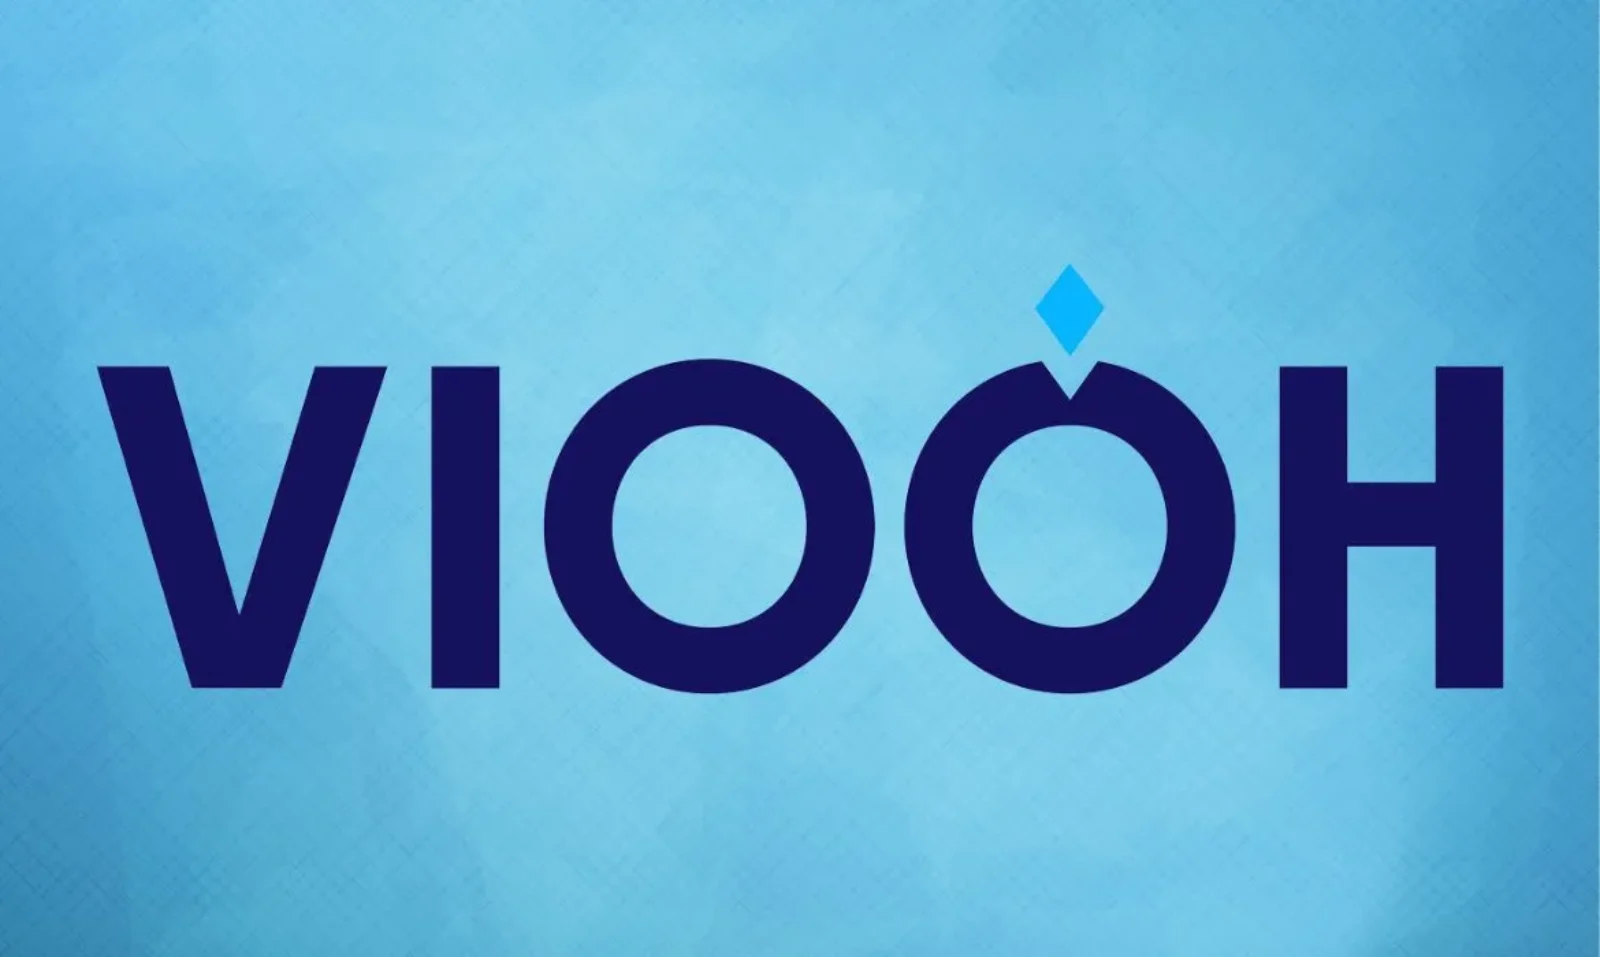 VIOOH, Intersection, programmatic, DOOH, digital screens, advertising, out-of-home media, US cities, media partnership, real-time trading, audience targeting,